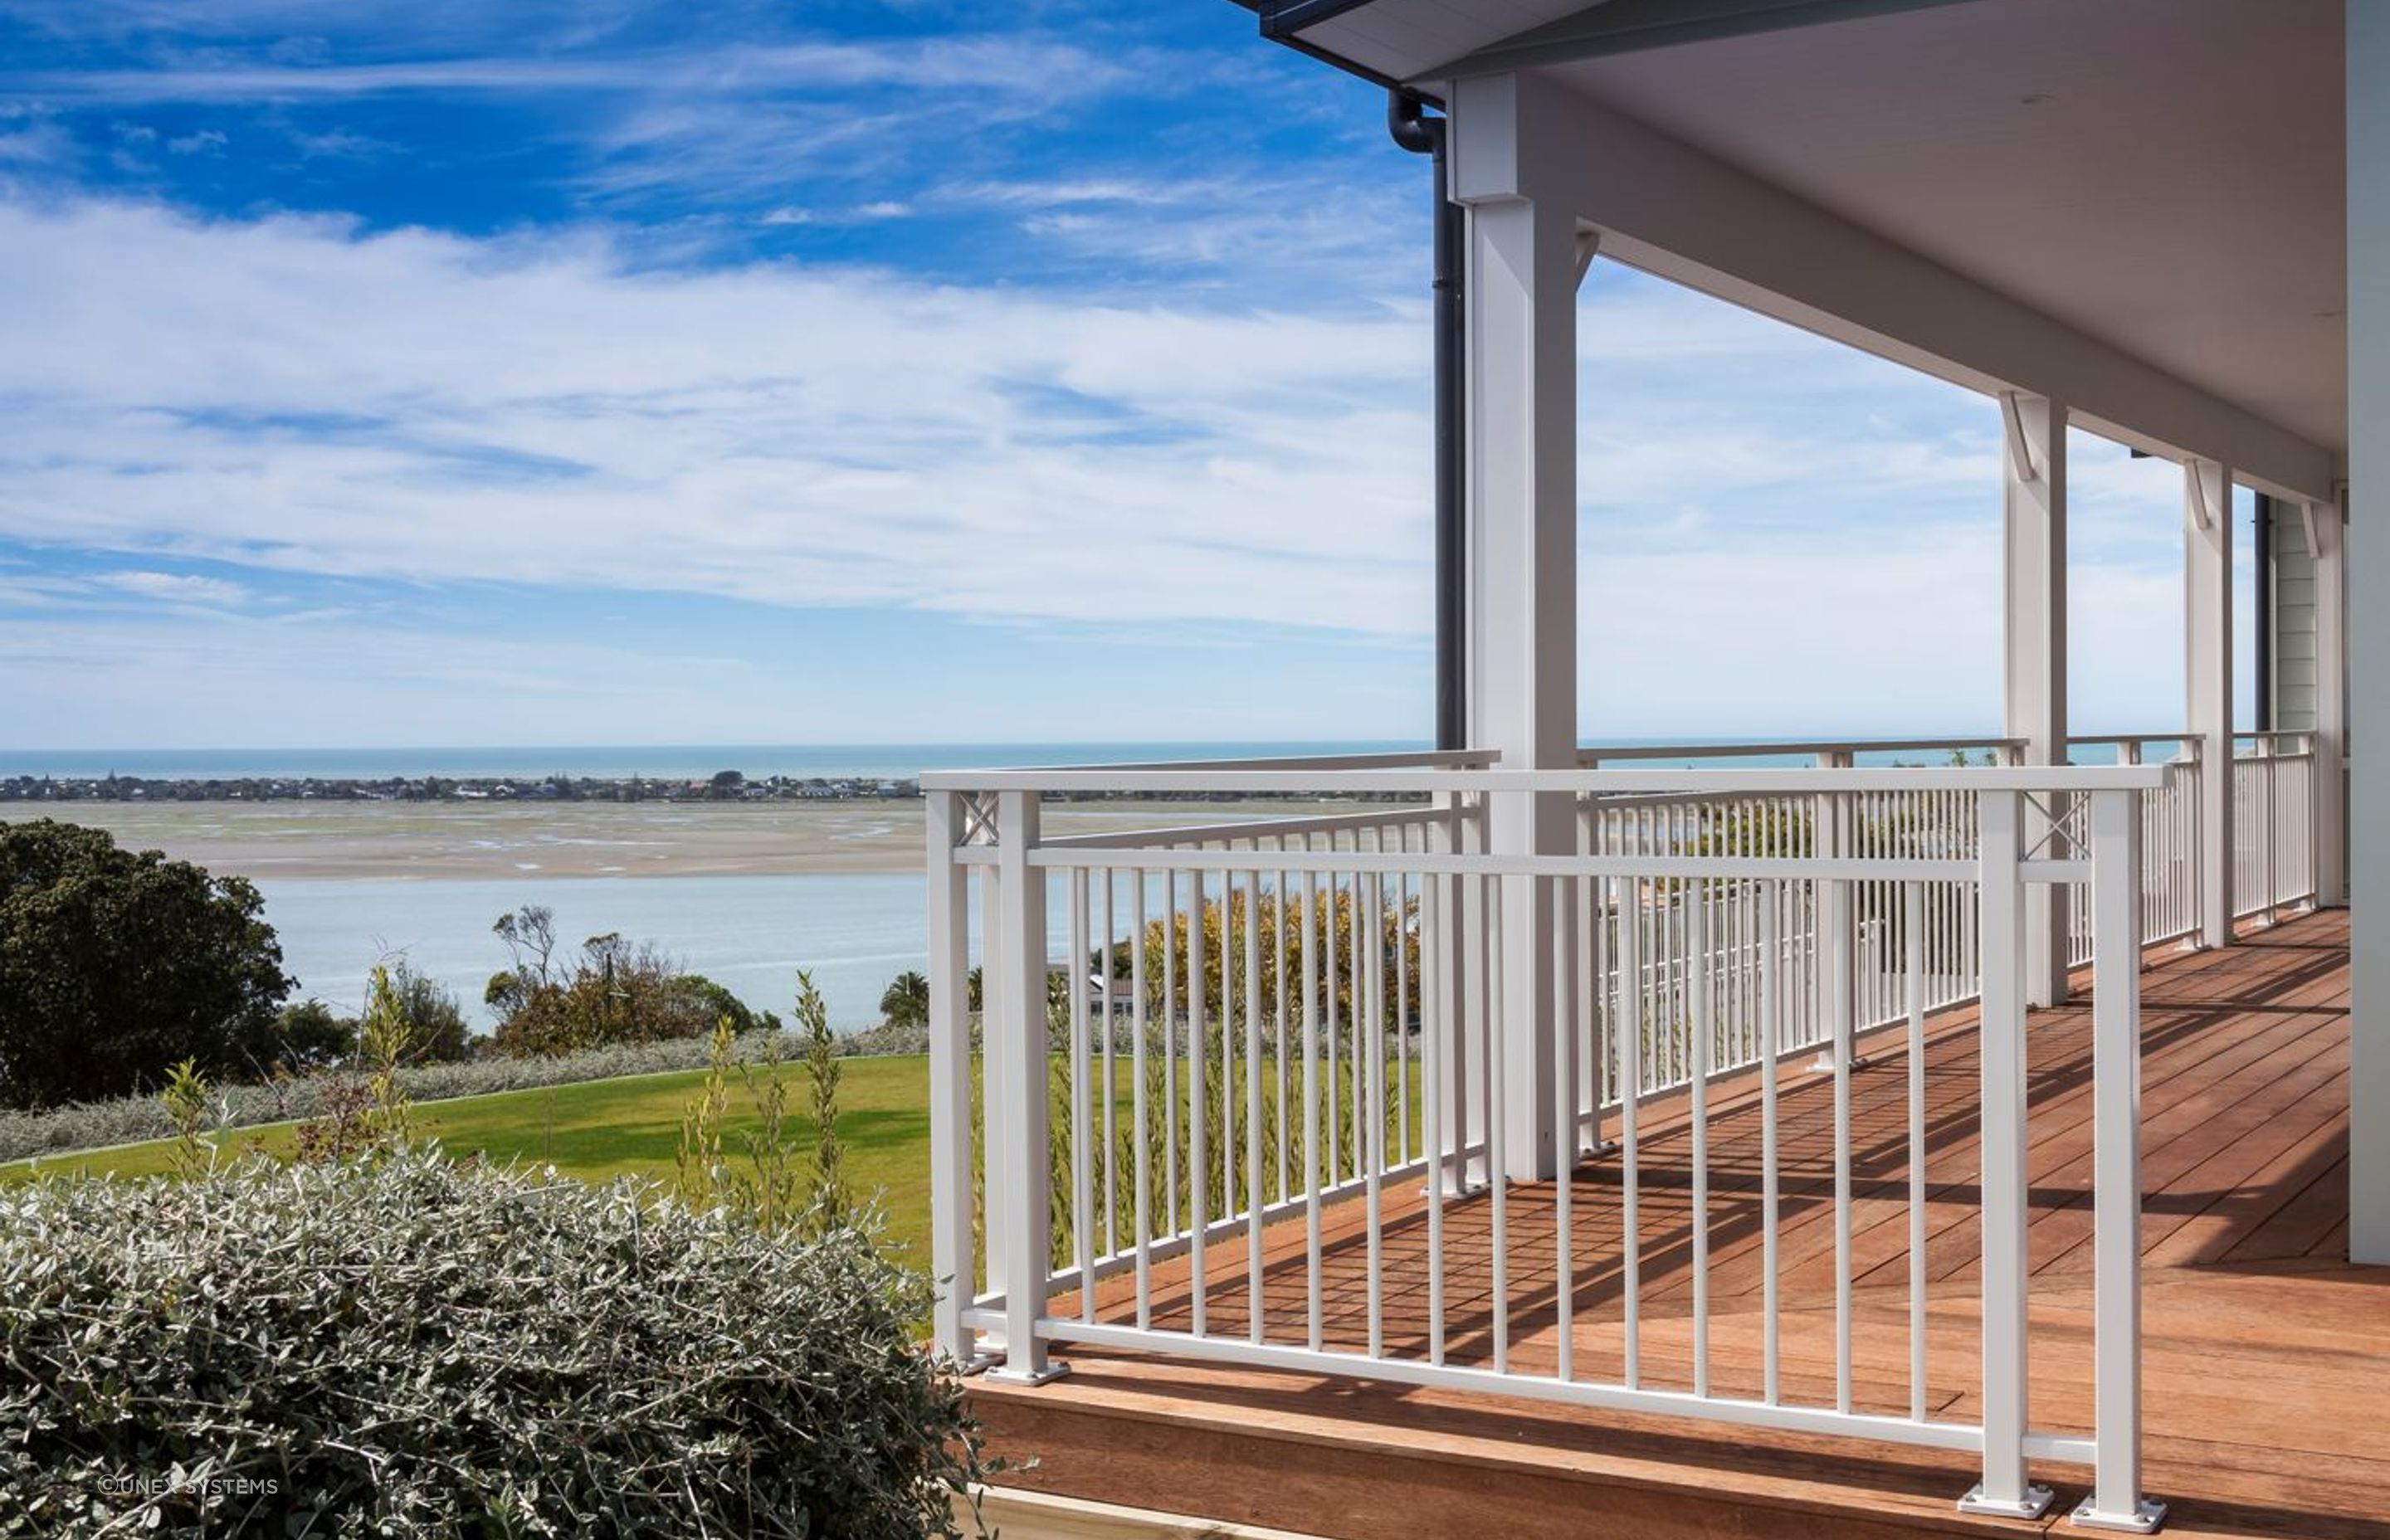 High-quality balustrades, like the Wilton Framed Balustrades, deliver on both form and function